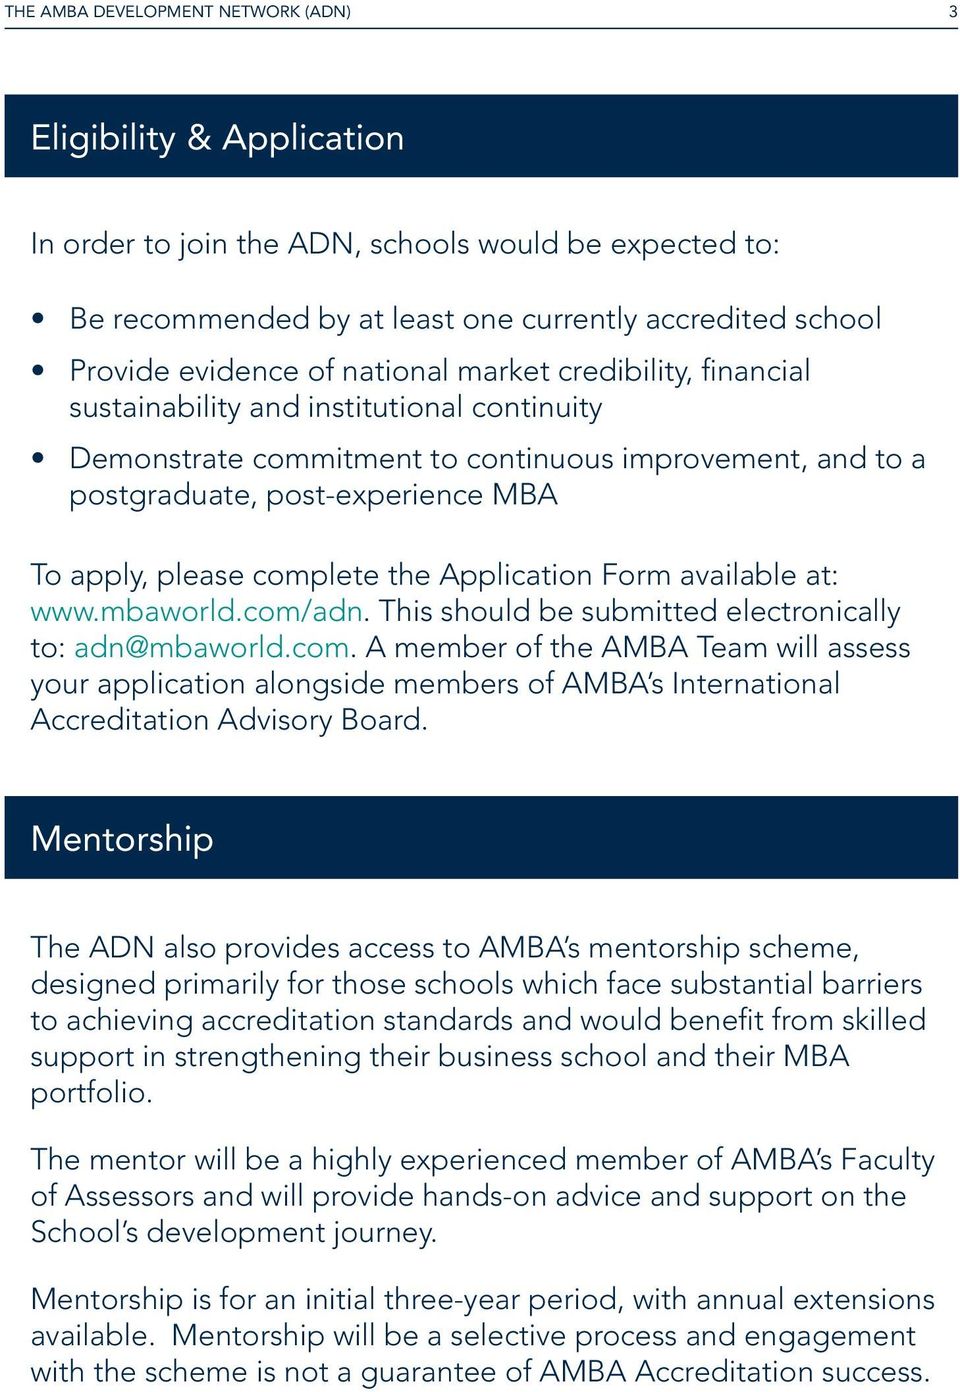 complete the Application Form available at: www.mbaworld.com/adn. This should be submitted electronically to: adn@mbaworld.com. A member of the AMBA Team will assess your application alongside members of AMBA s International Accreditation Advisory Board.